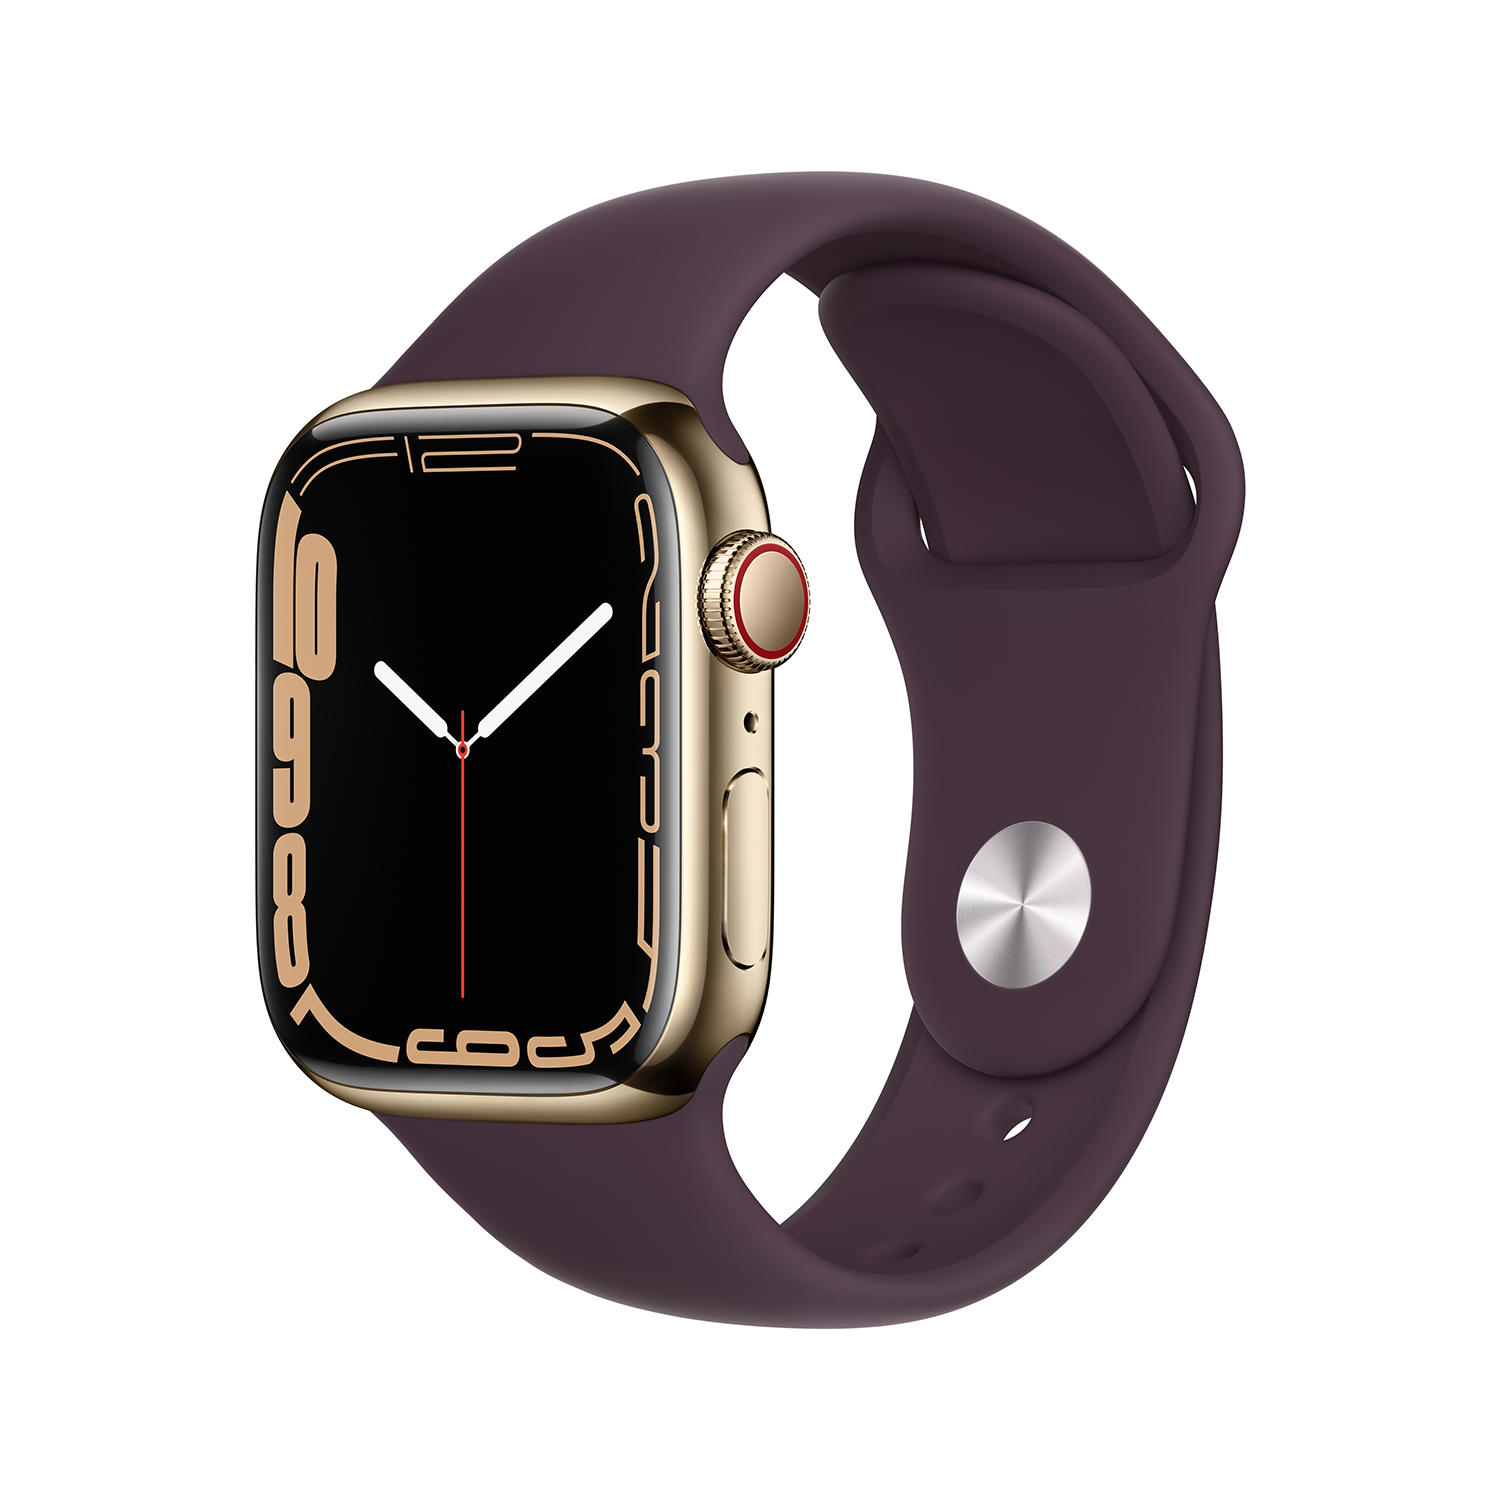 Apple Watch Series 7 (GPS + Cellular) 41mm Gold Stainless Steel Case with Dark Cherry Sport Band – Gold